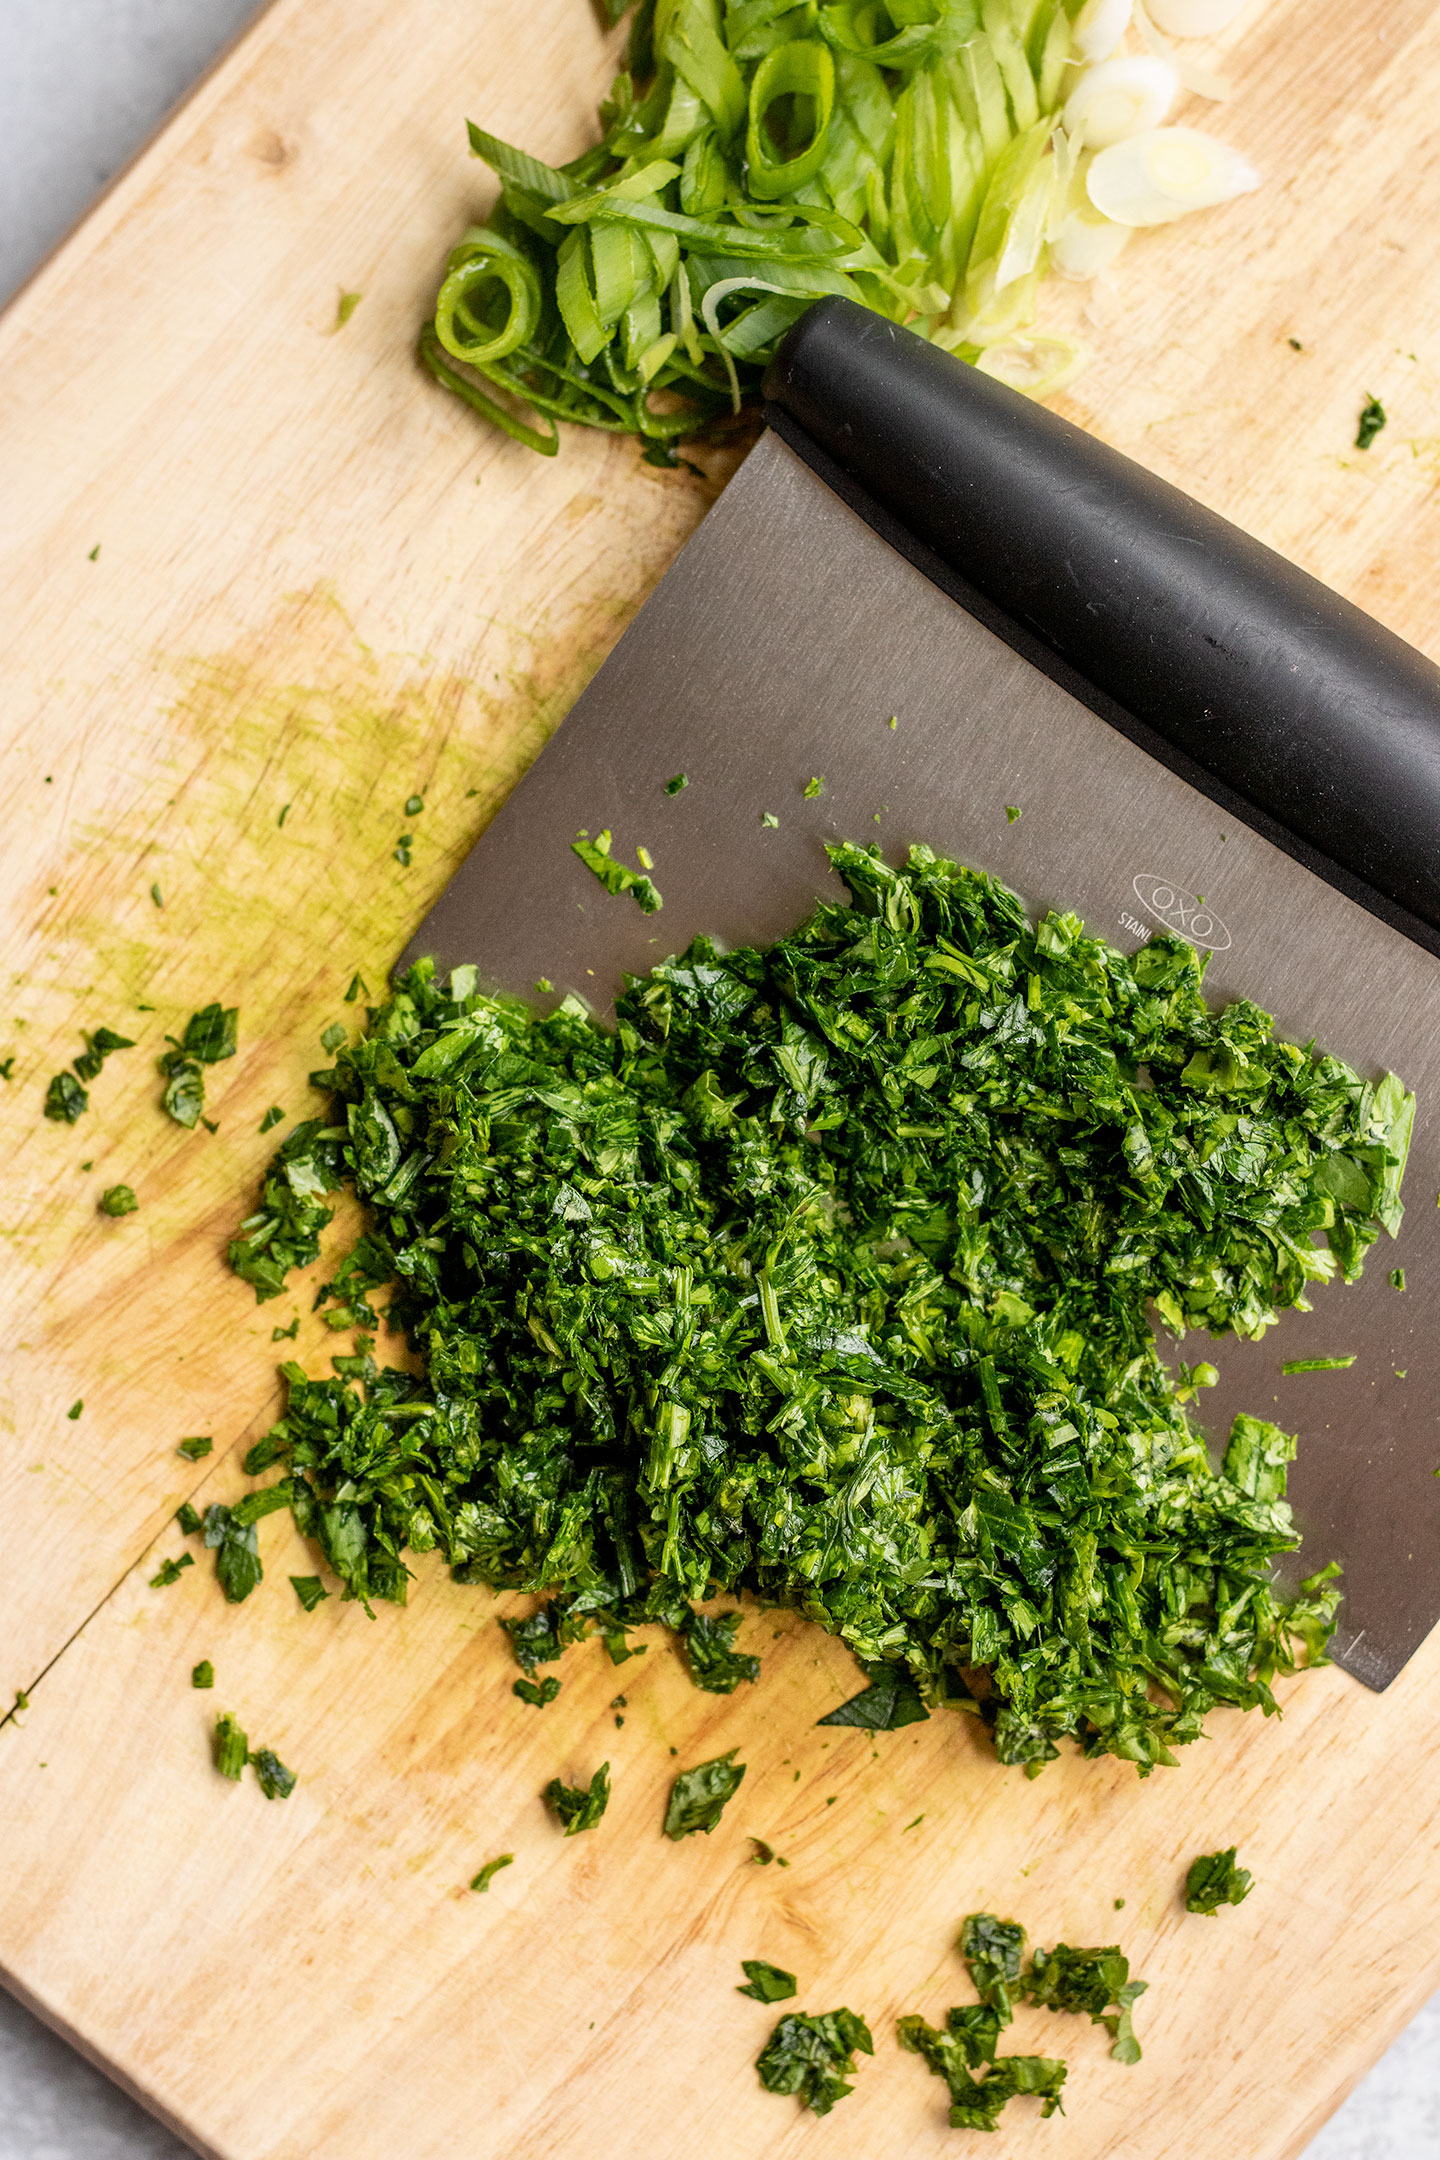 Minced herbs and scallions on a cutting board being scraped with a bench scraper.